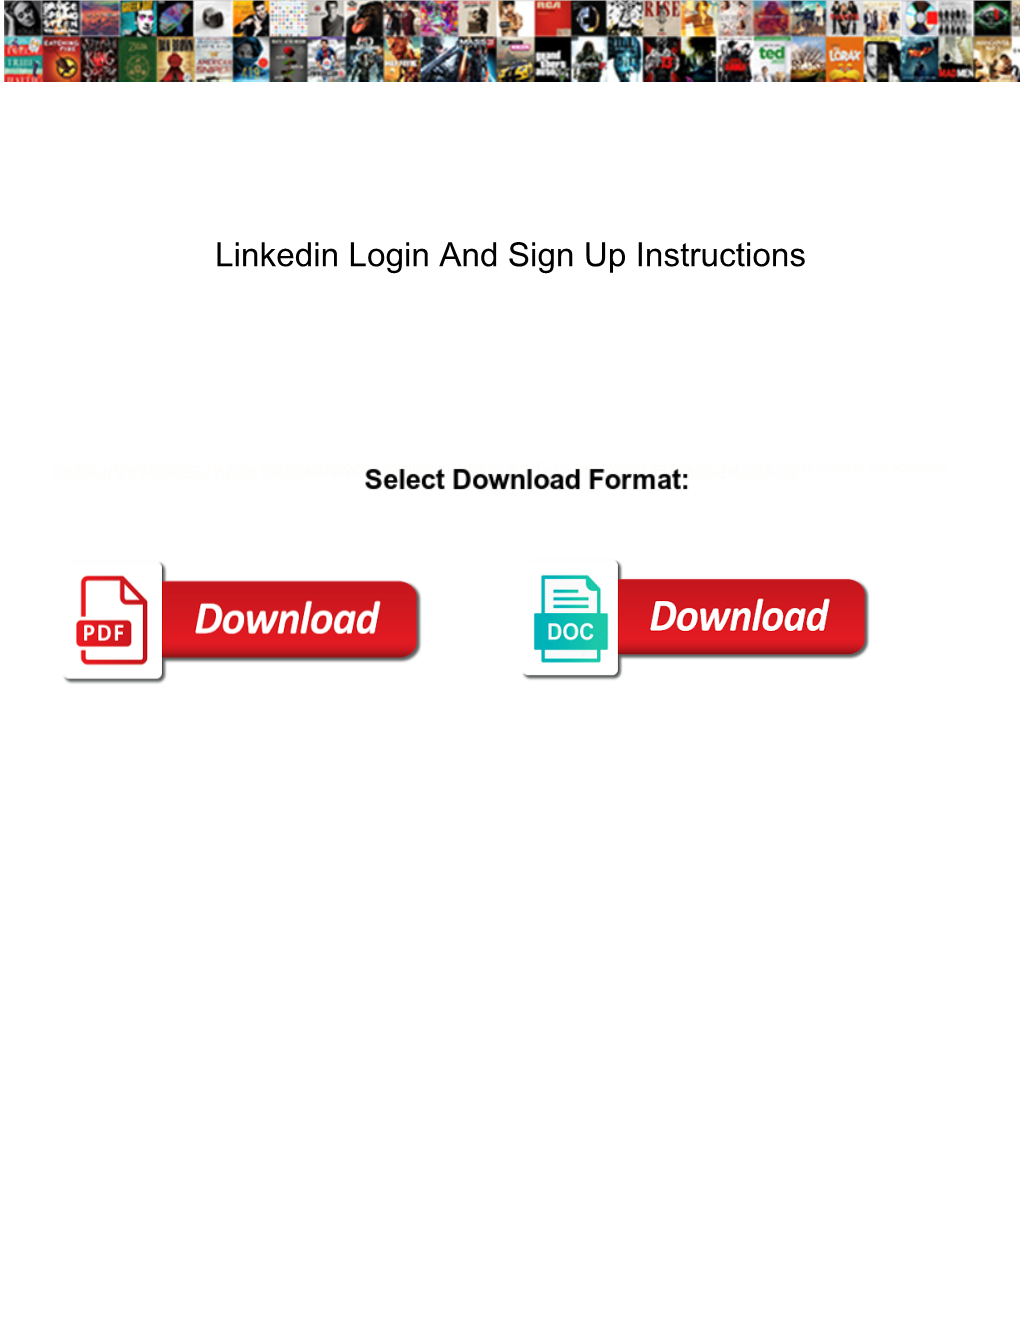 Linkedin Login and Sign up Instructions